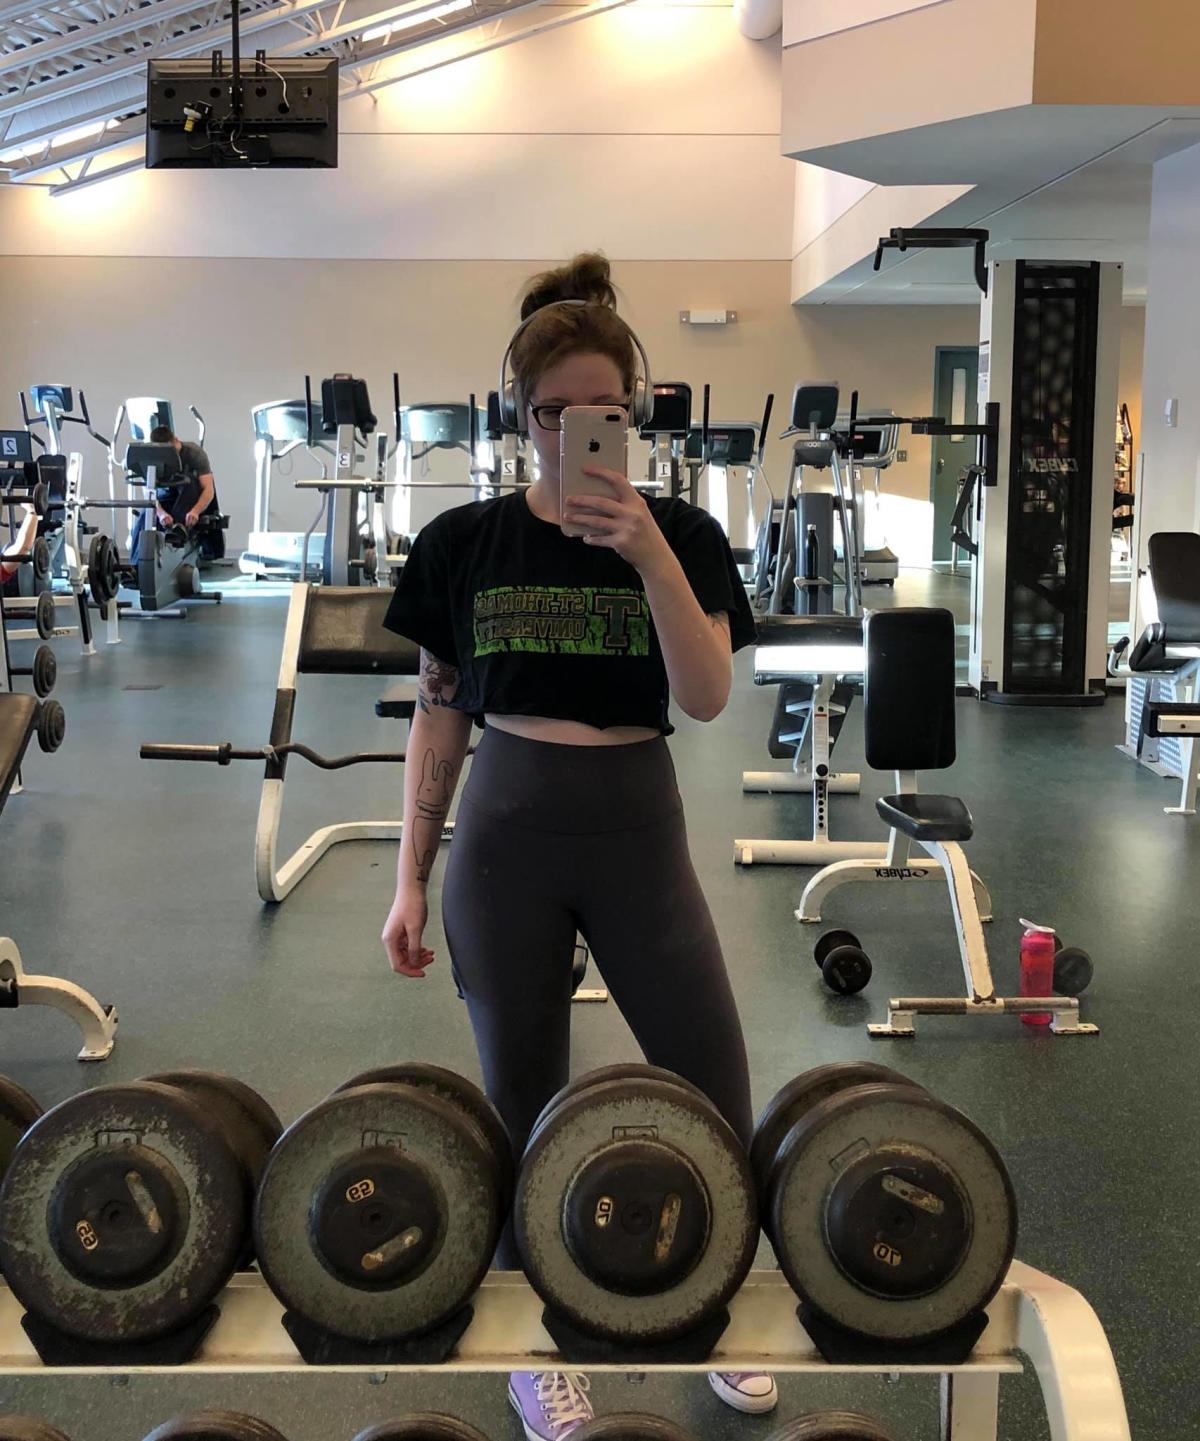 PEI student says her gym outfit — a crop top — was called too